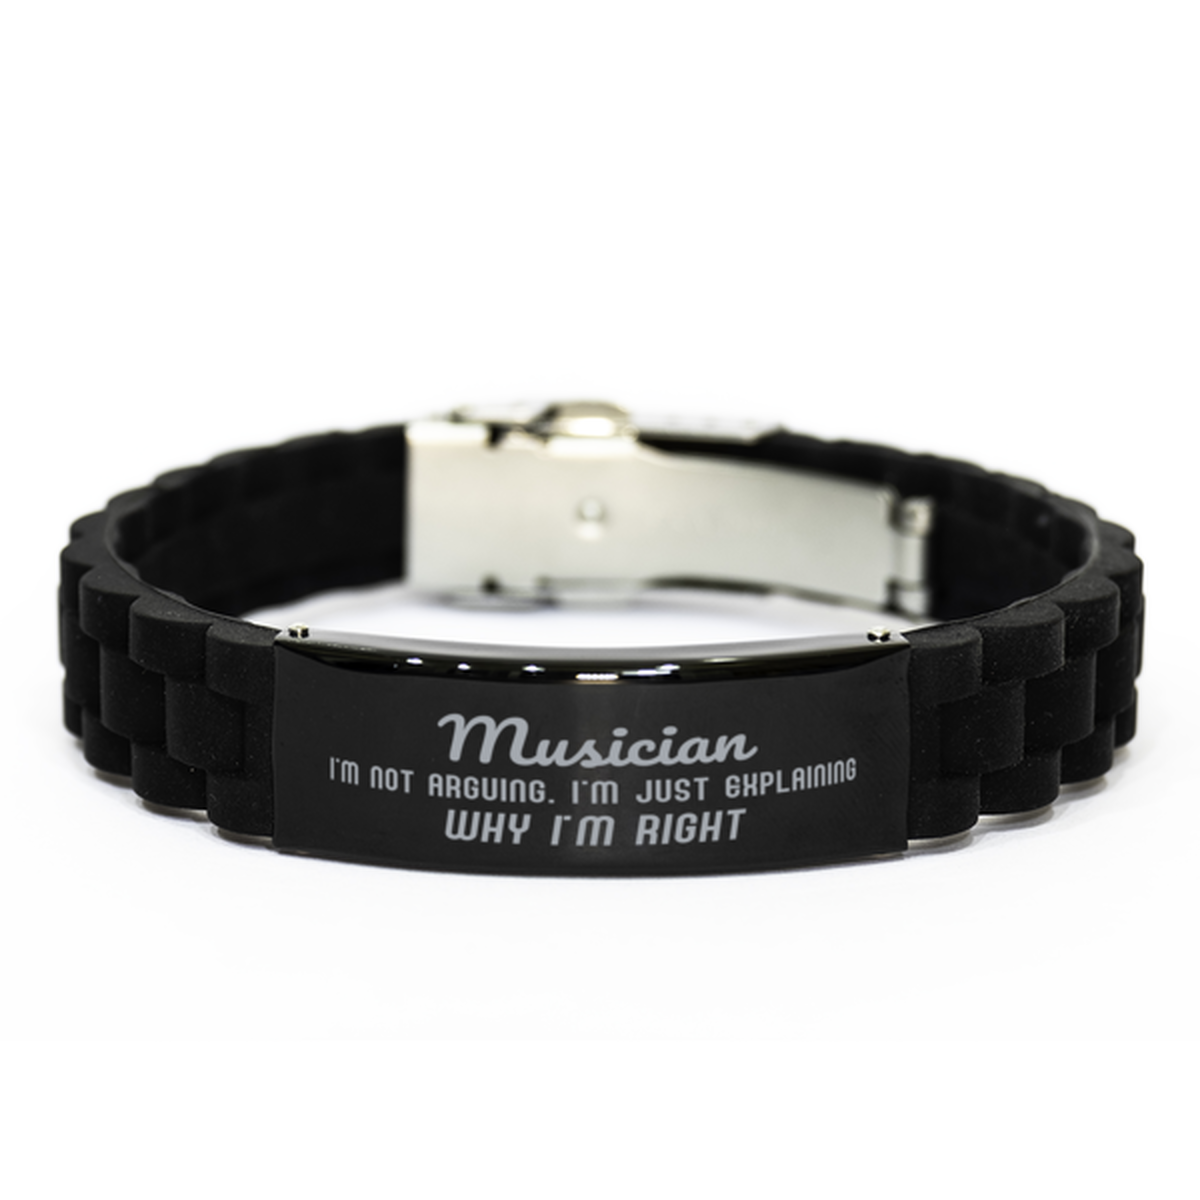 Musician I'm not Arguing. I'm Just Explaining Why I'm RIGHT Black Glidelock Clasp Bracelet, Funny Saying Quote Musician Gifts For Musician Graduation Birthday Christmas Gifts for Men Women Coworker